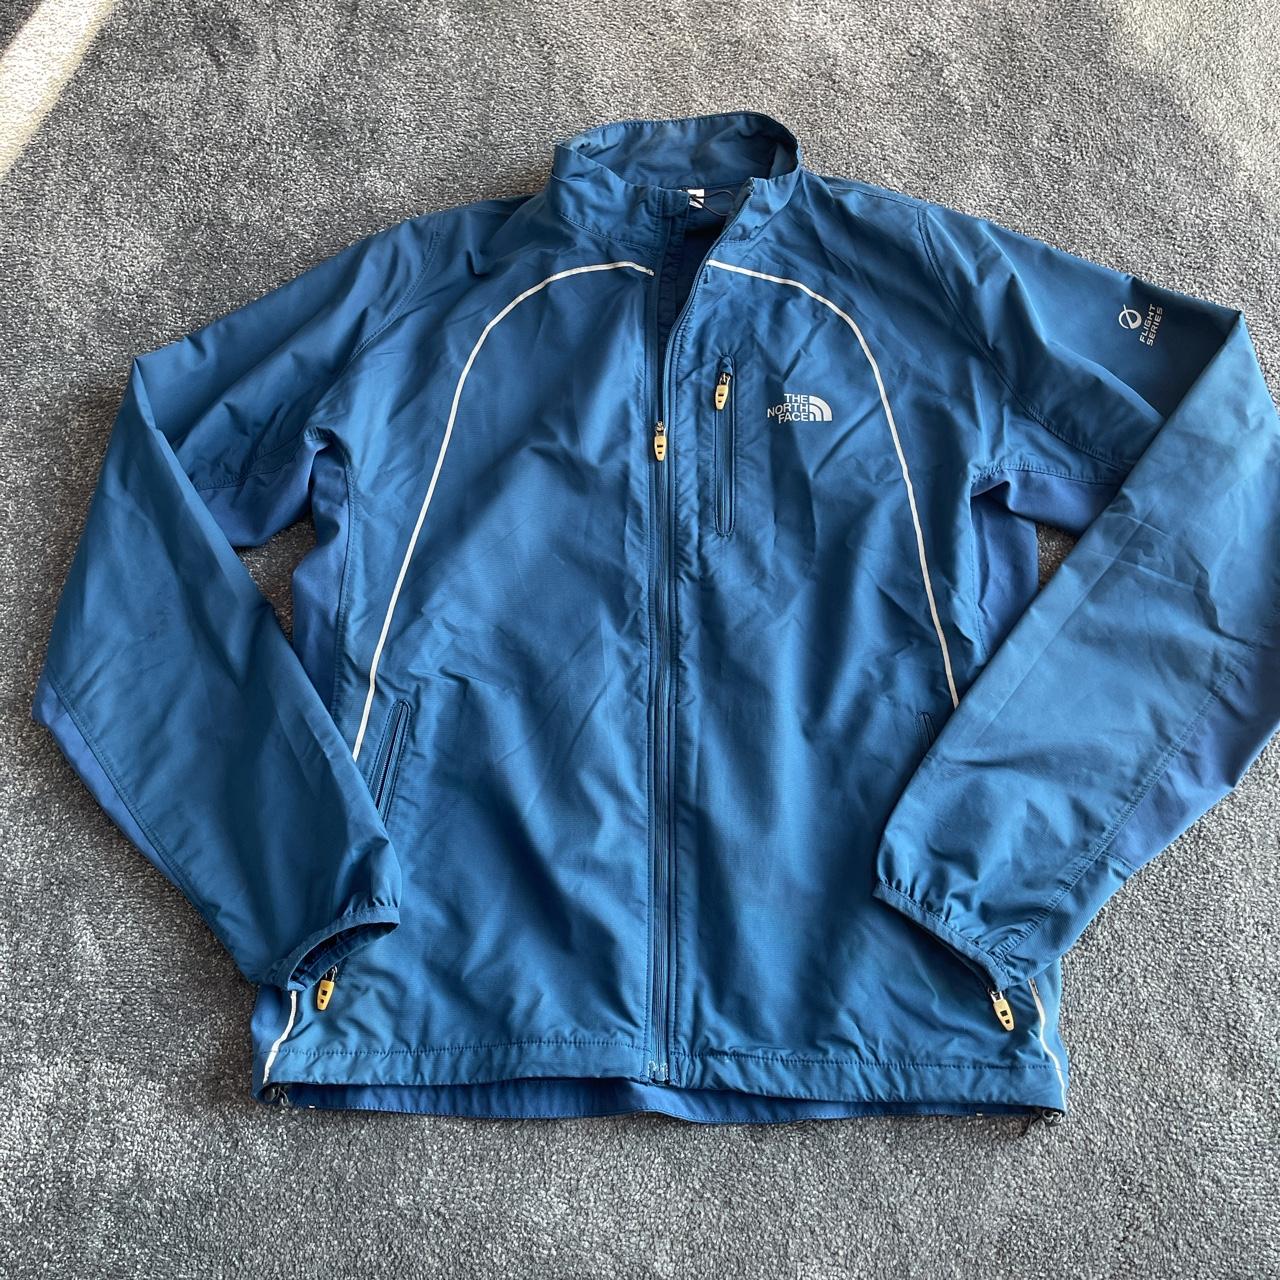 MENS THE NORTH FACE BLUE REFLECTIVE WATERPROOF... - Depop